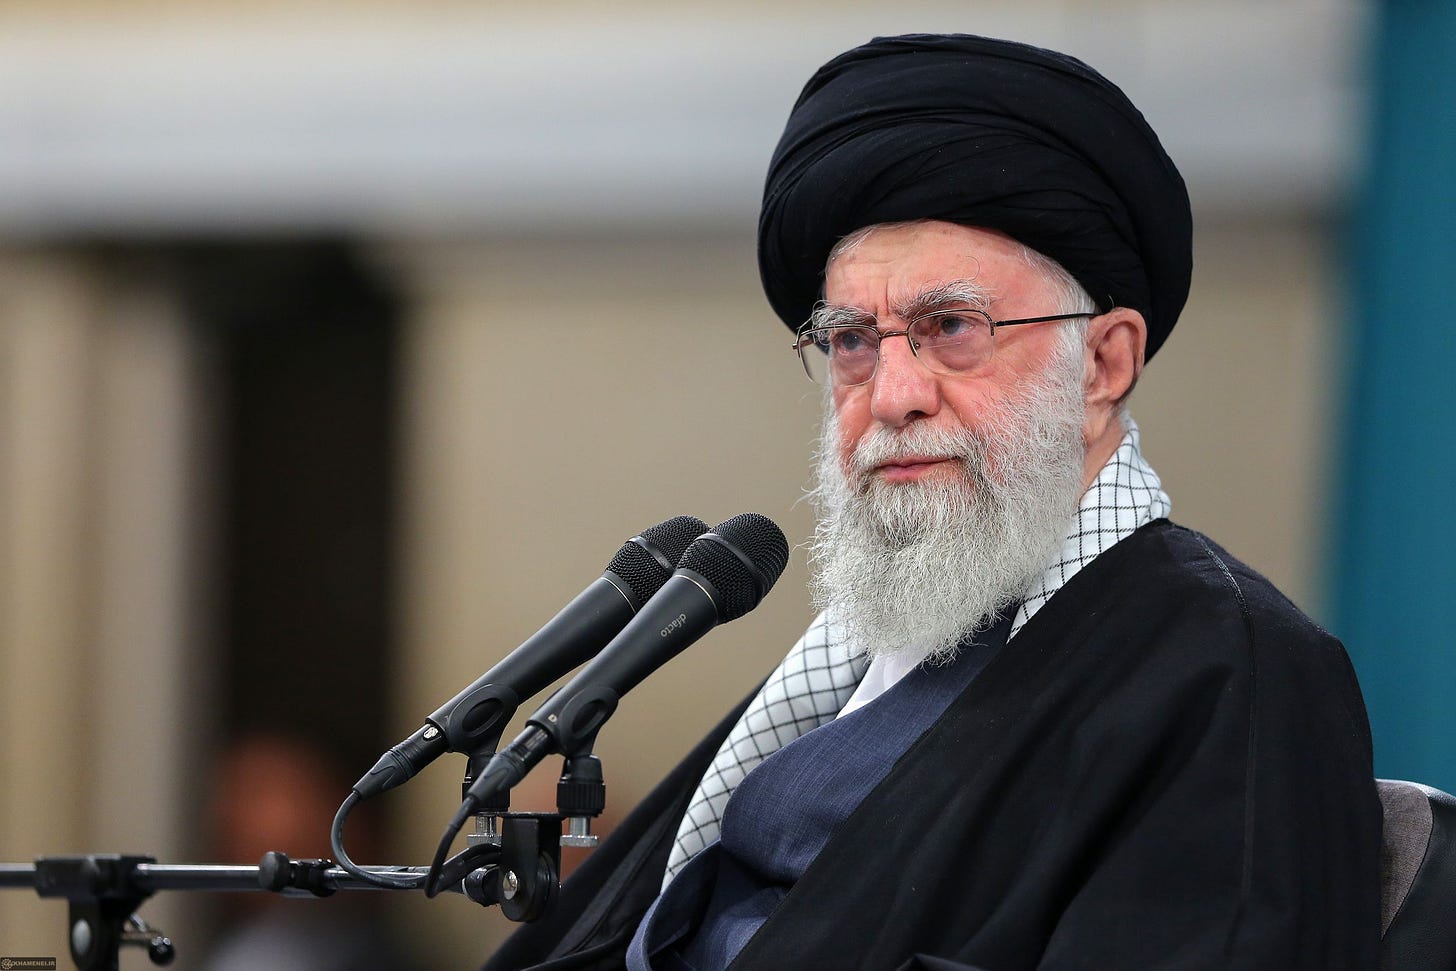 Iran's supreme leader Ali Khamenei, pictured on April 7, has already vowed to attack Israel